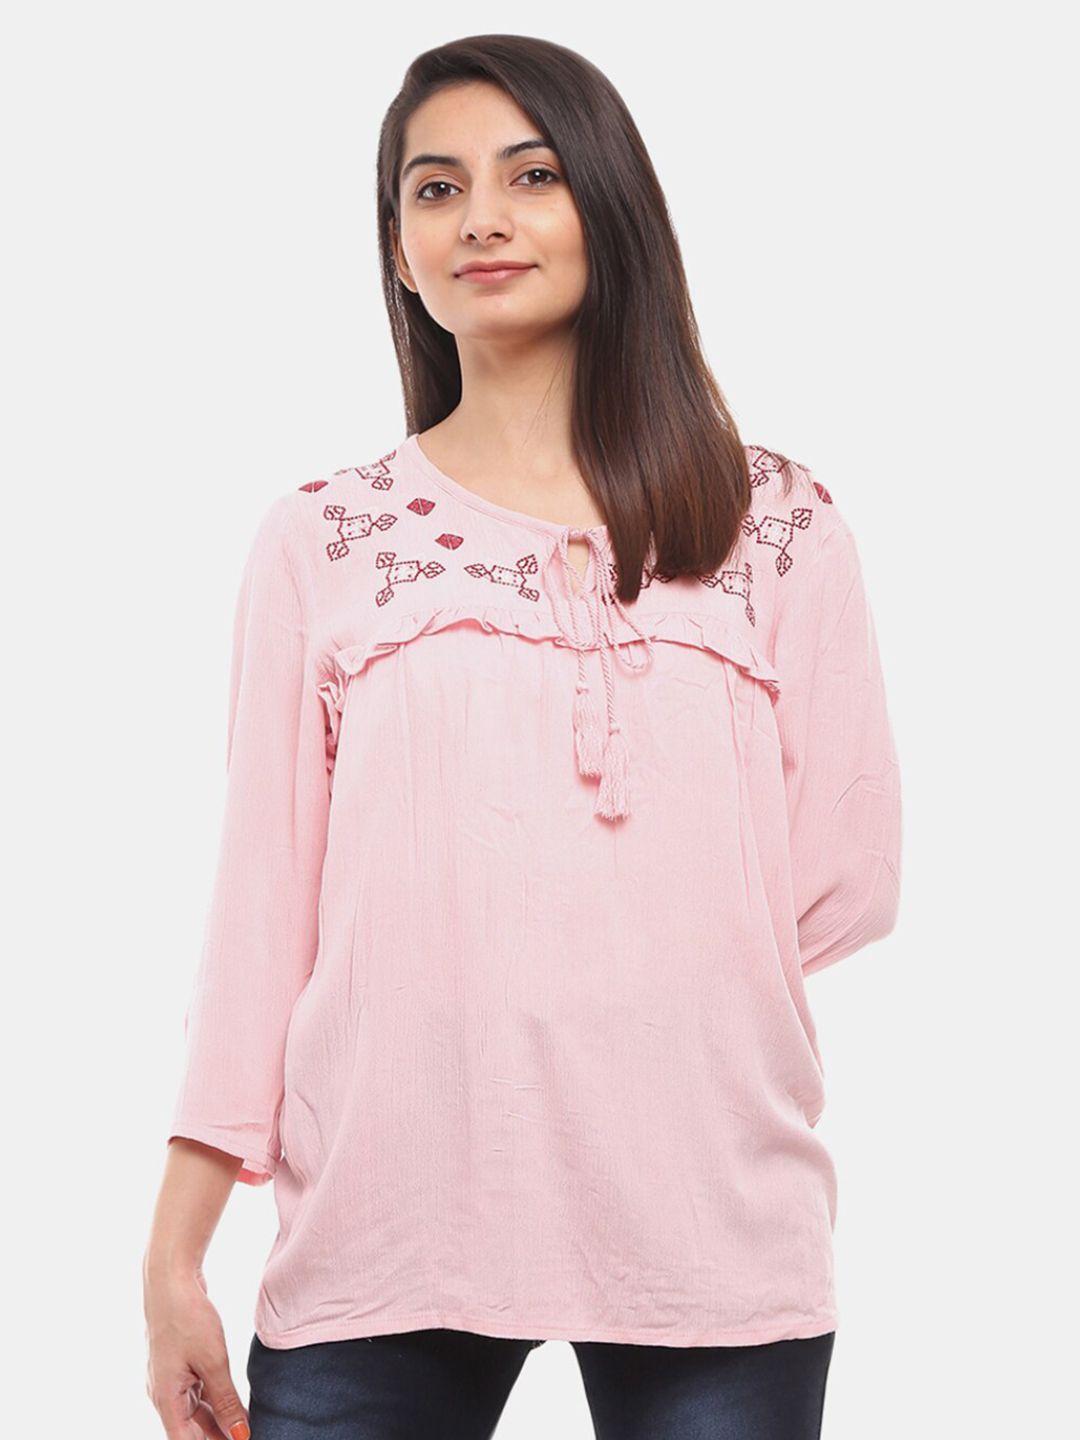 v-mart women western pink round tie-up geometric embroidered neck top